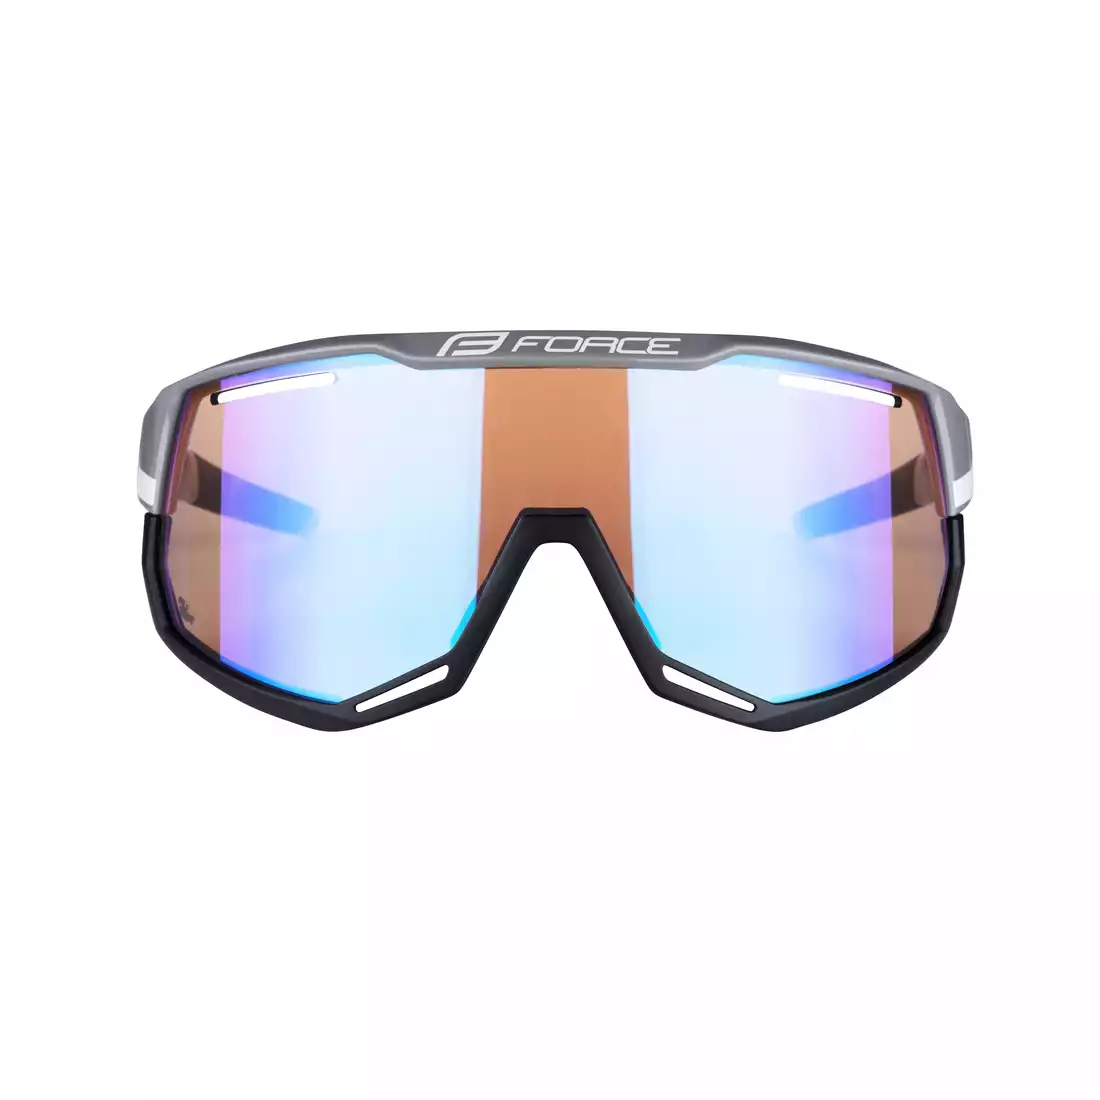 FORCE ATTIC Sports glasses with interchangeable lenses, gray and black